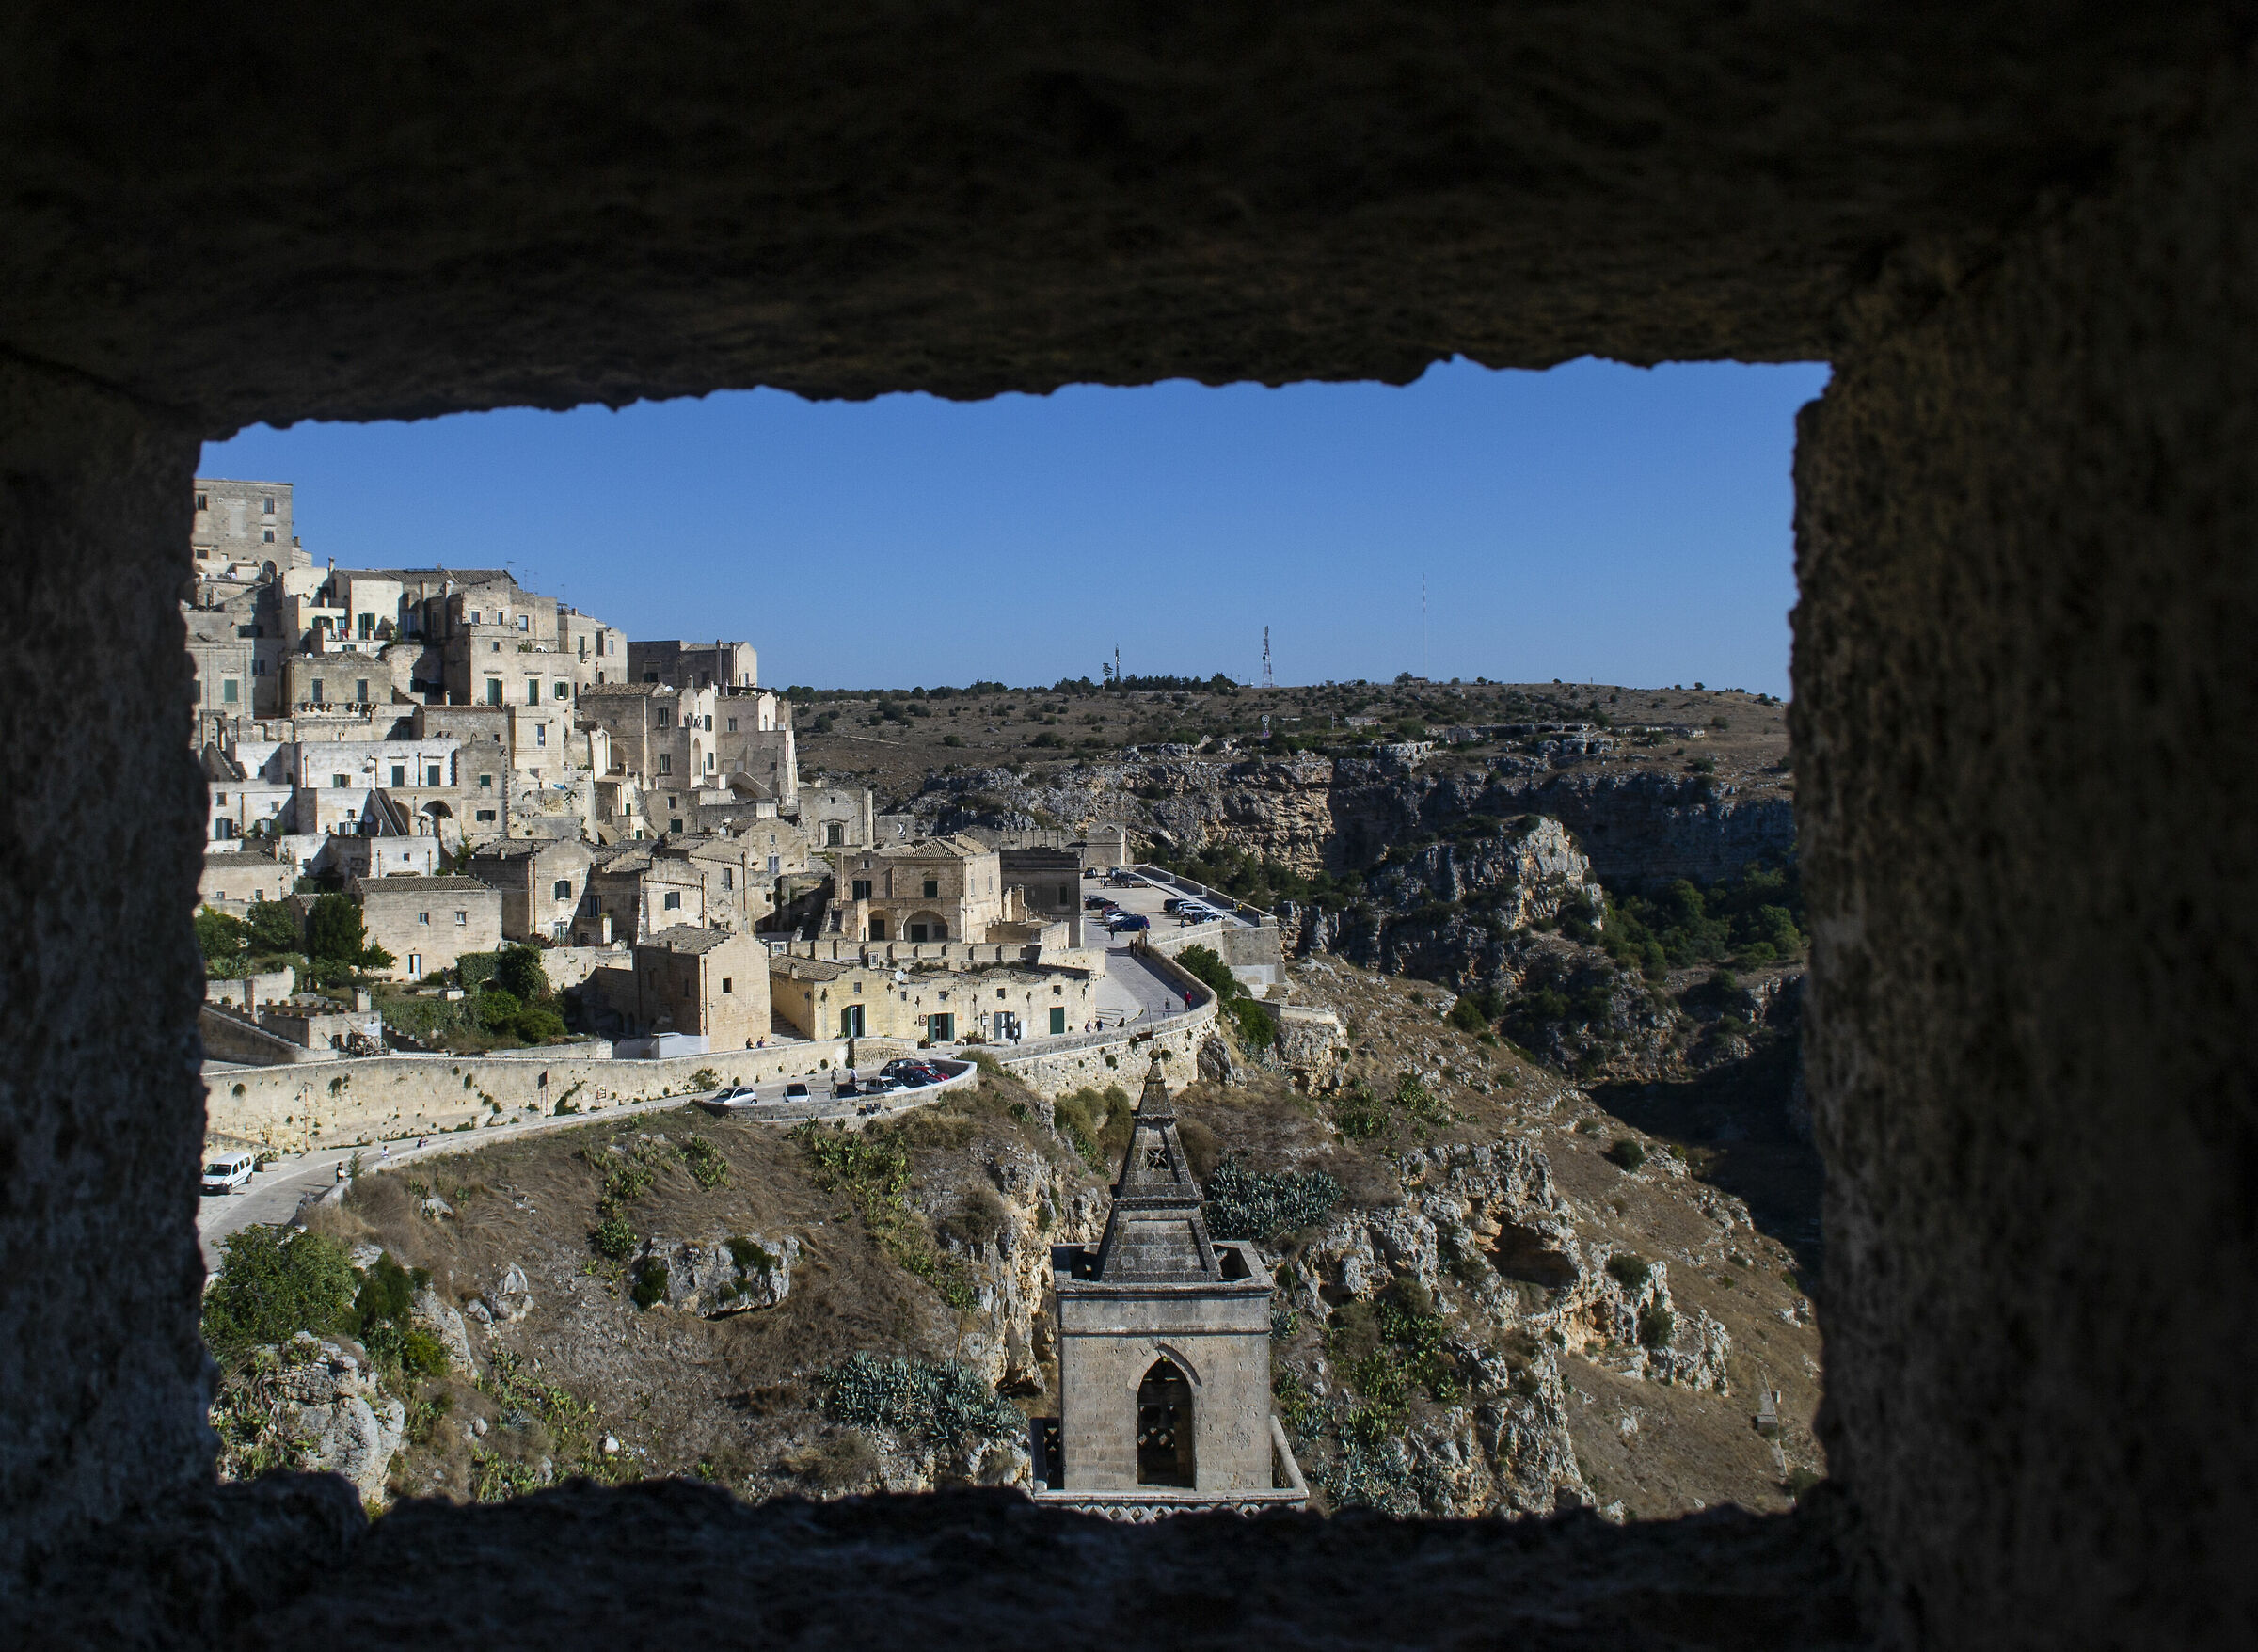 Postcard of the Stones of Matera...